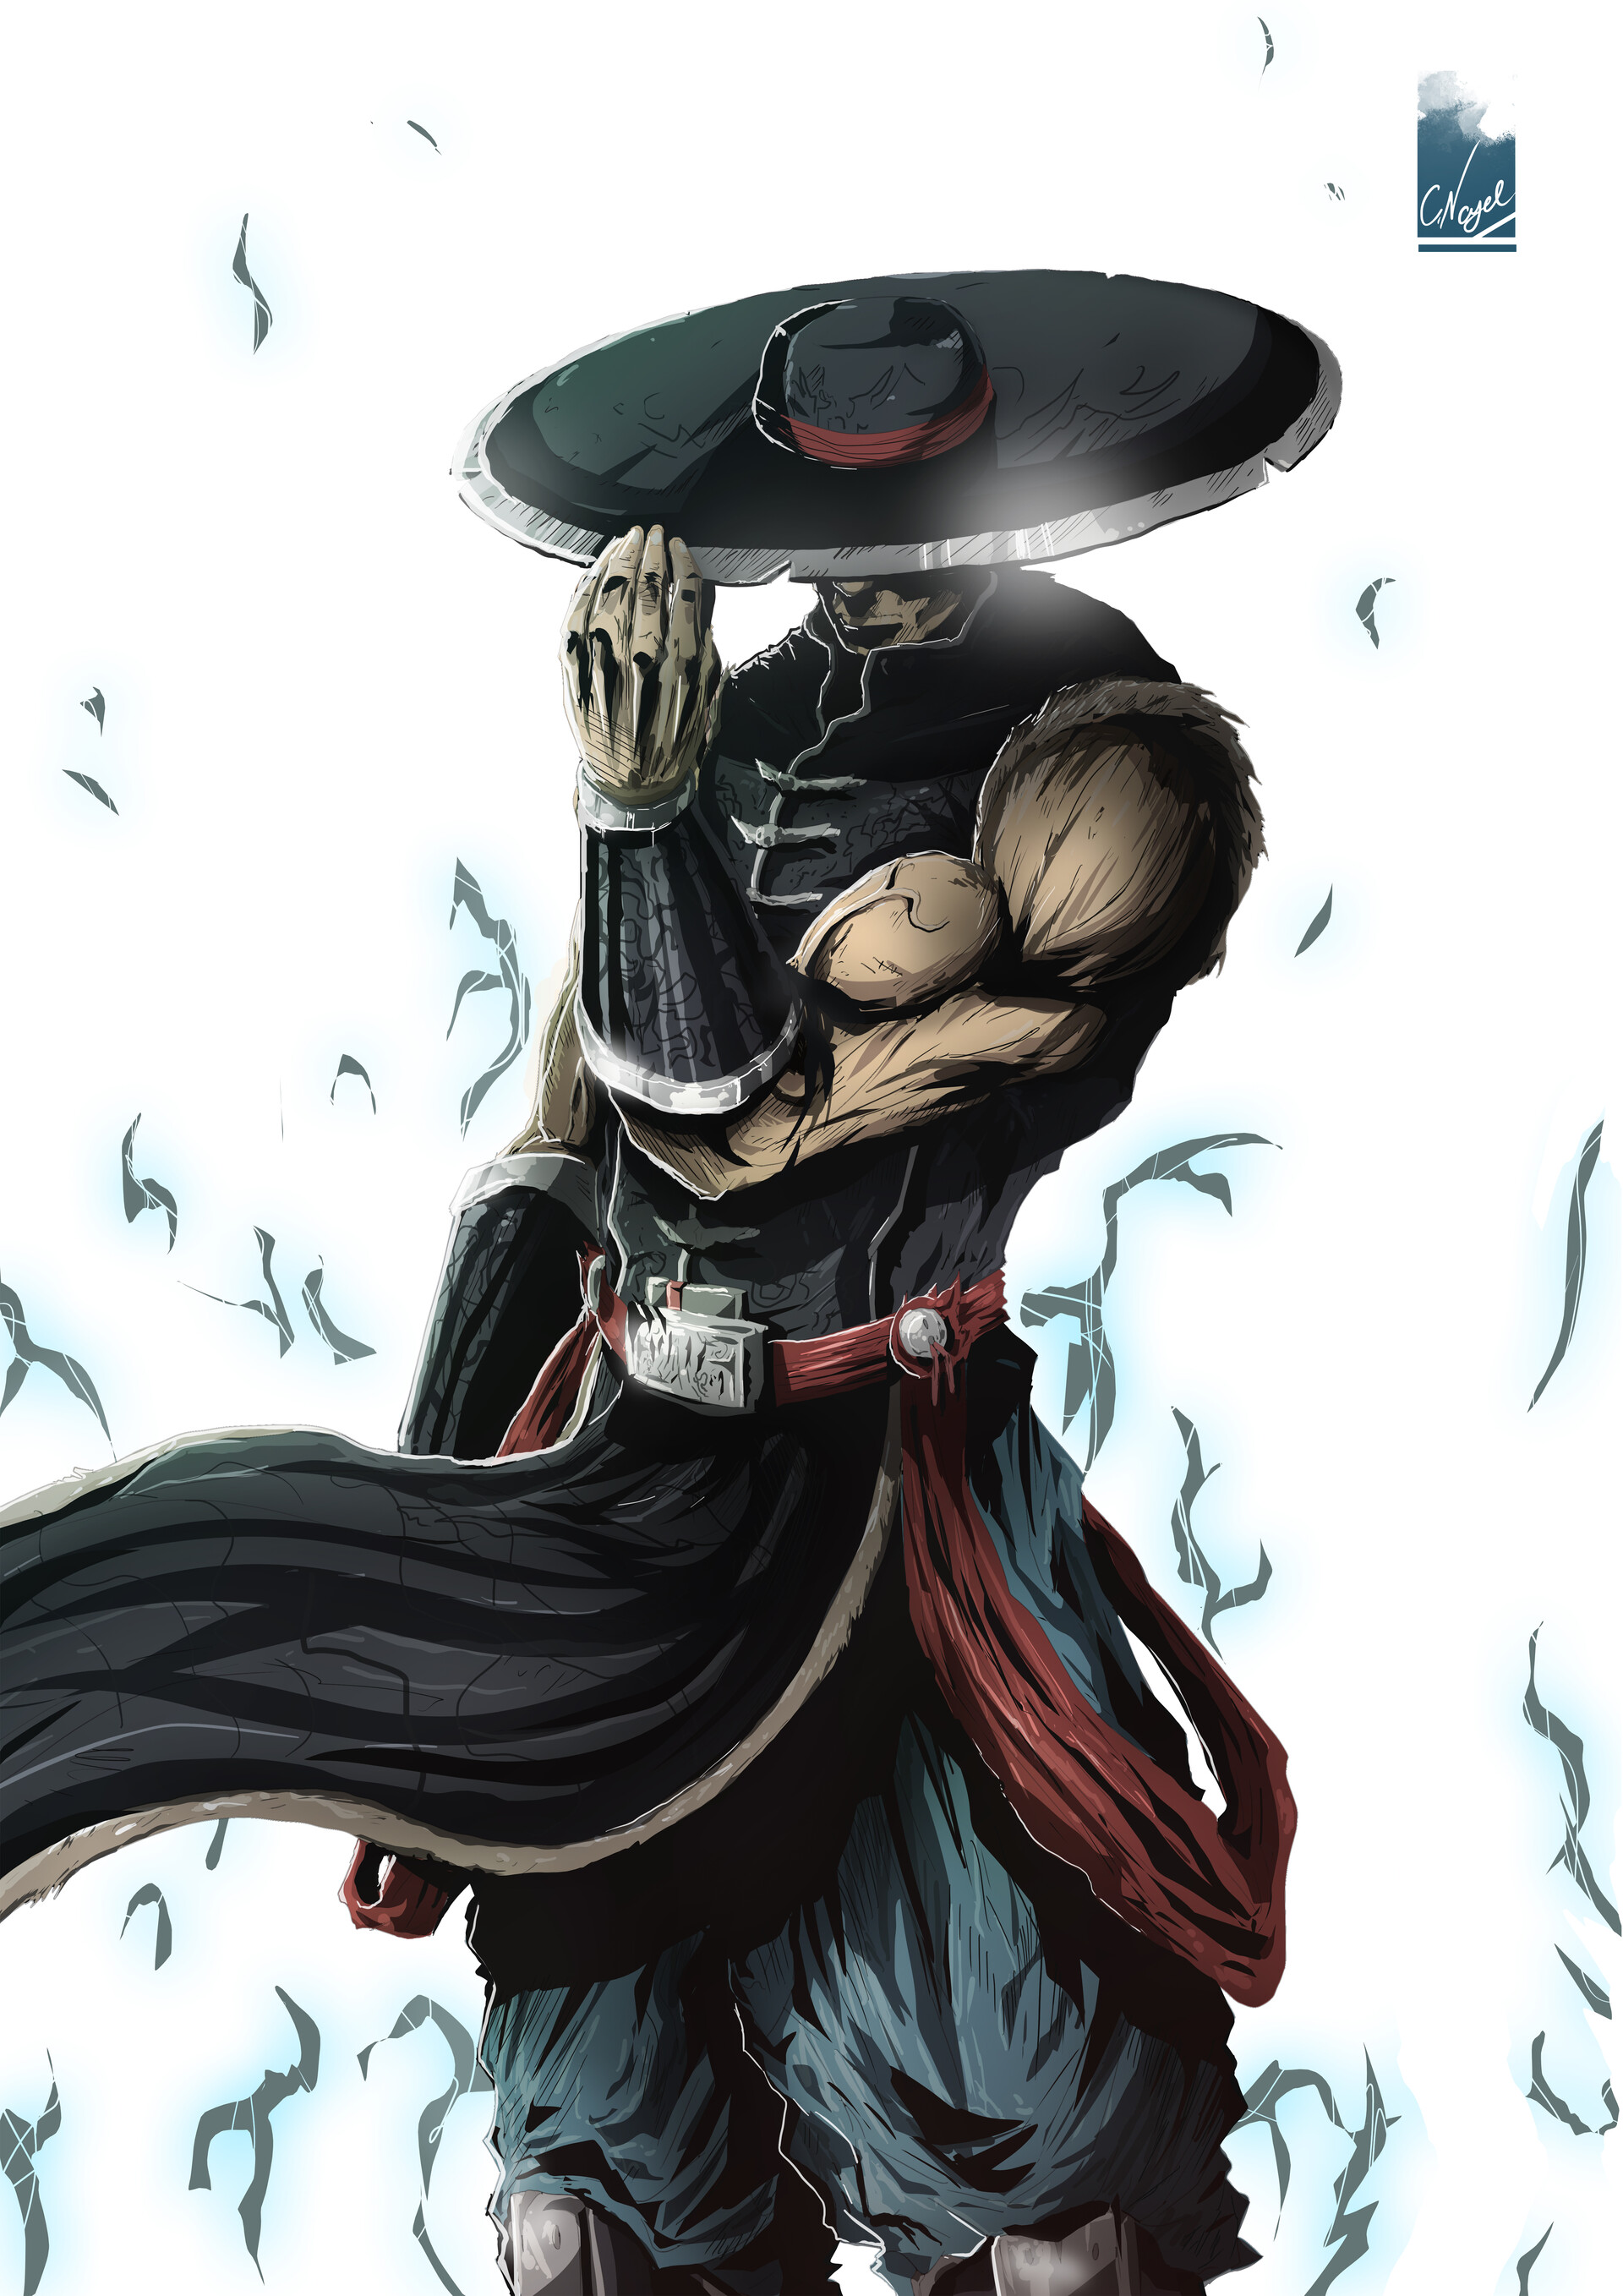 Kung Lao (from Mortal Kombat franchise), Colby Nagel